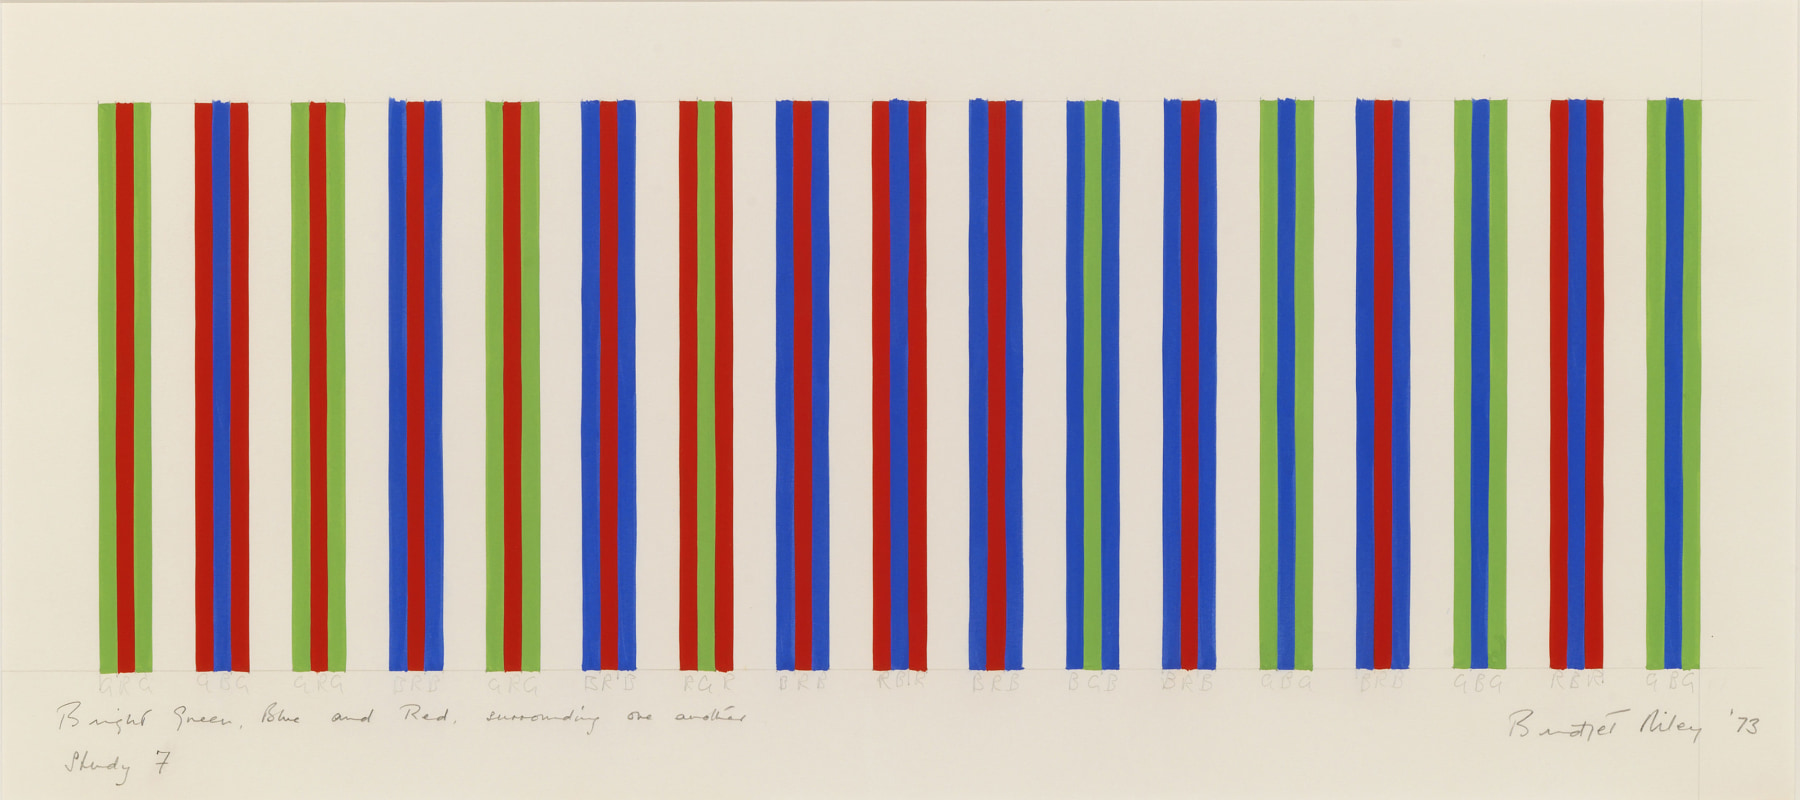 Bridget Riley, Bright Green, Blue and Red, Surrounding One Another, Study 7,&nbsp;1973